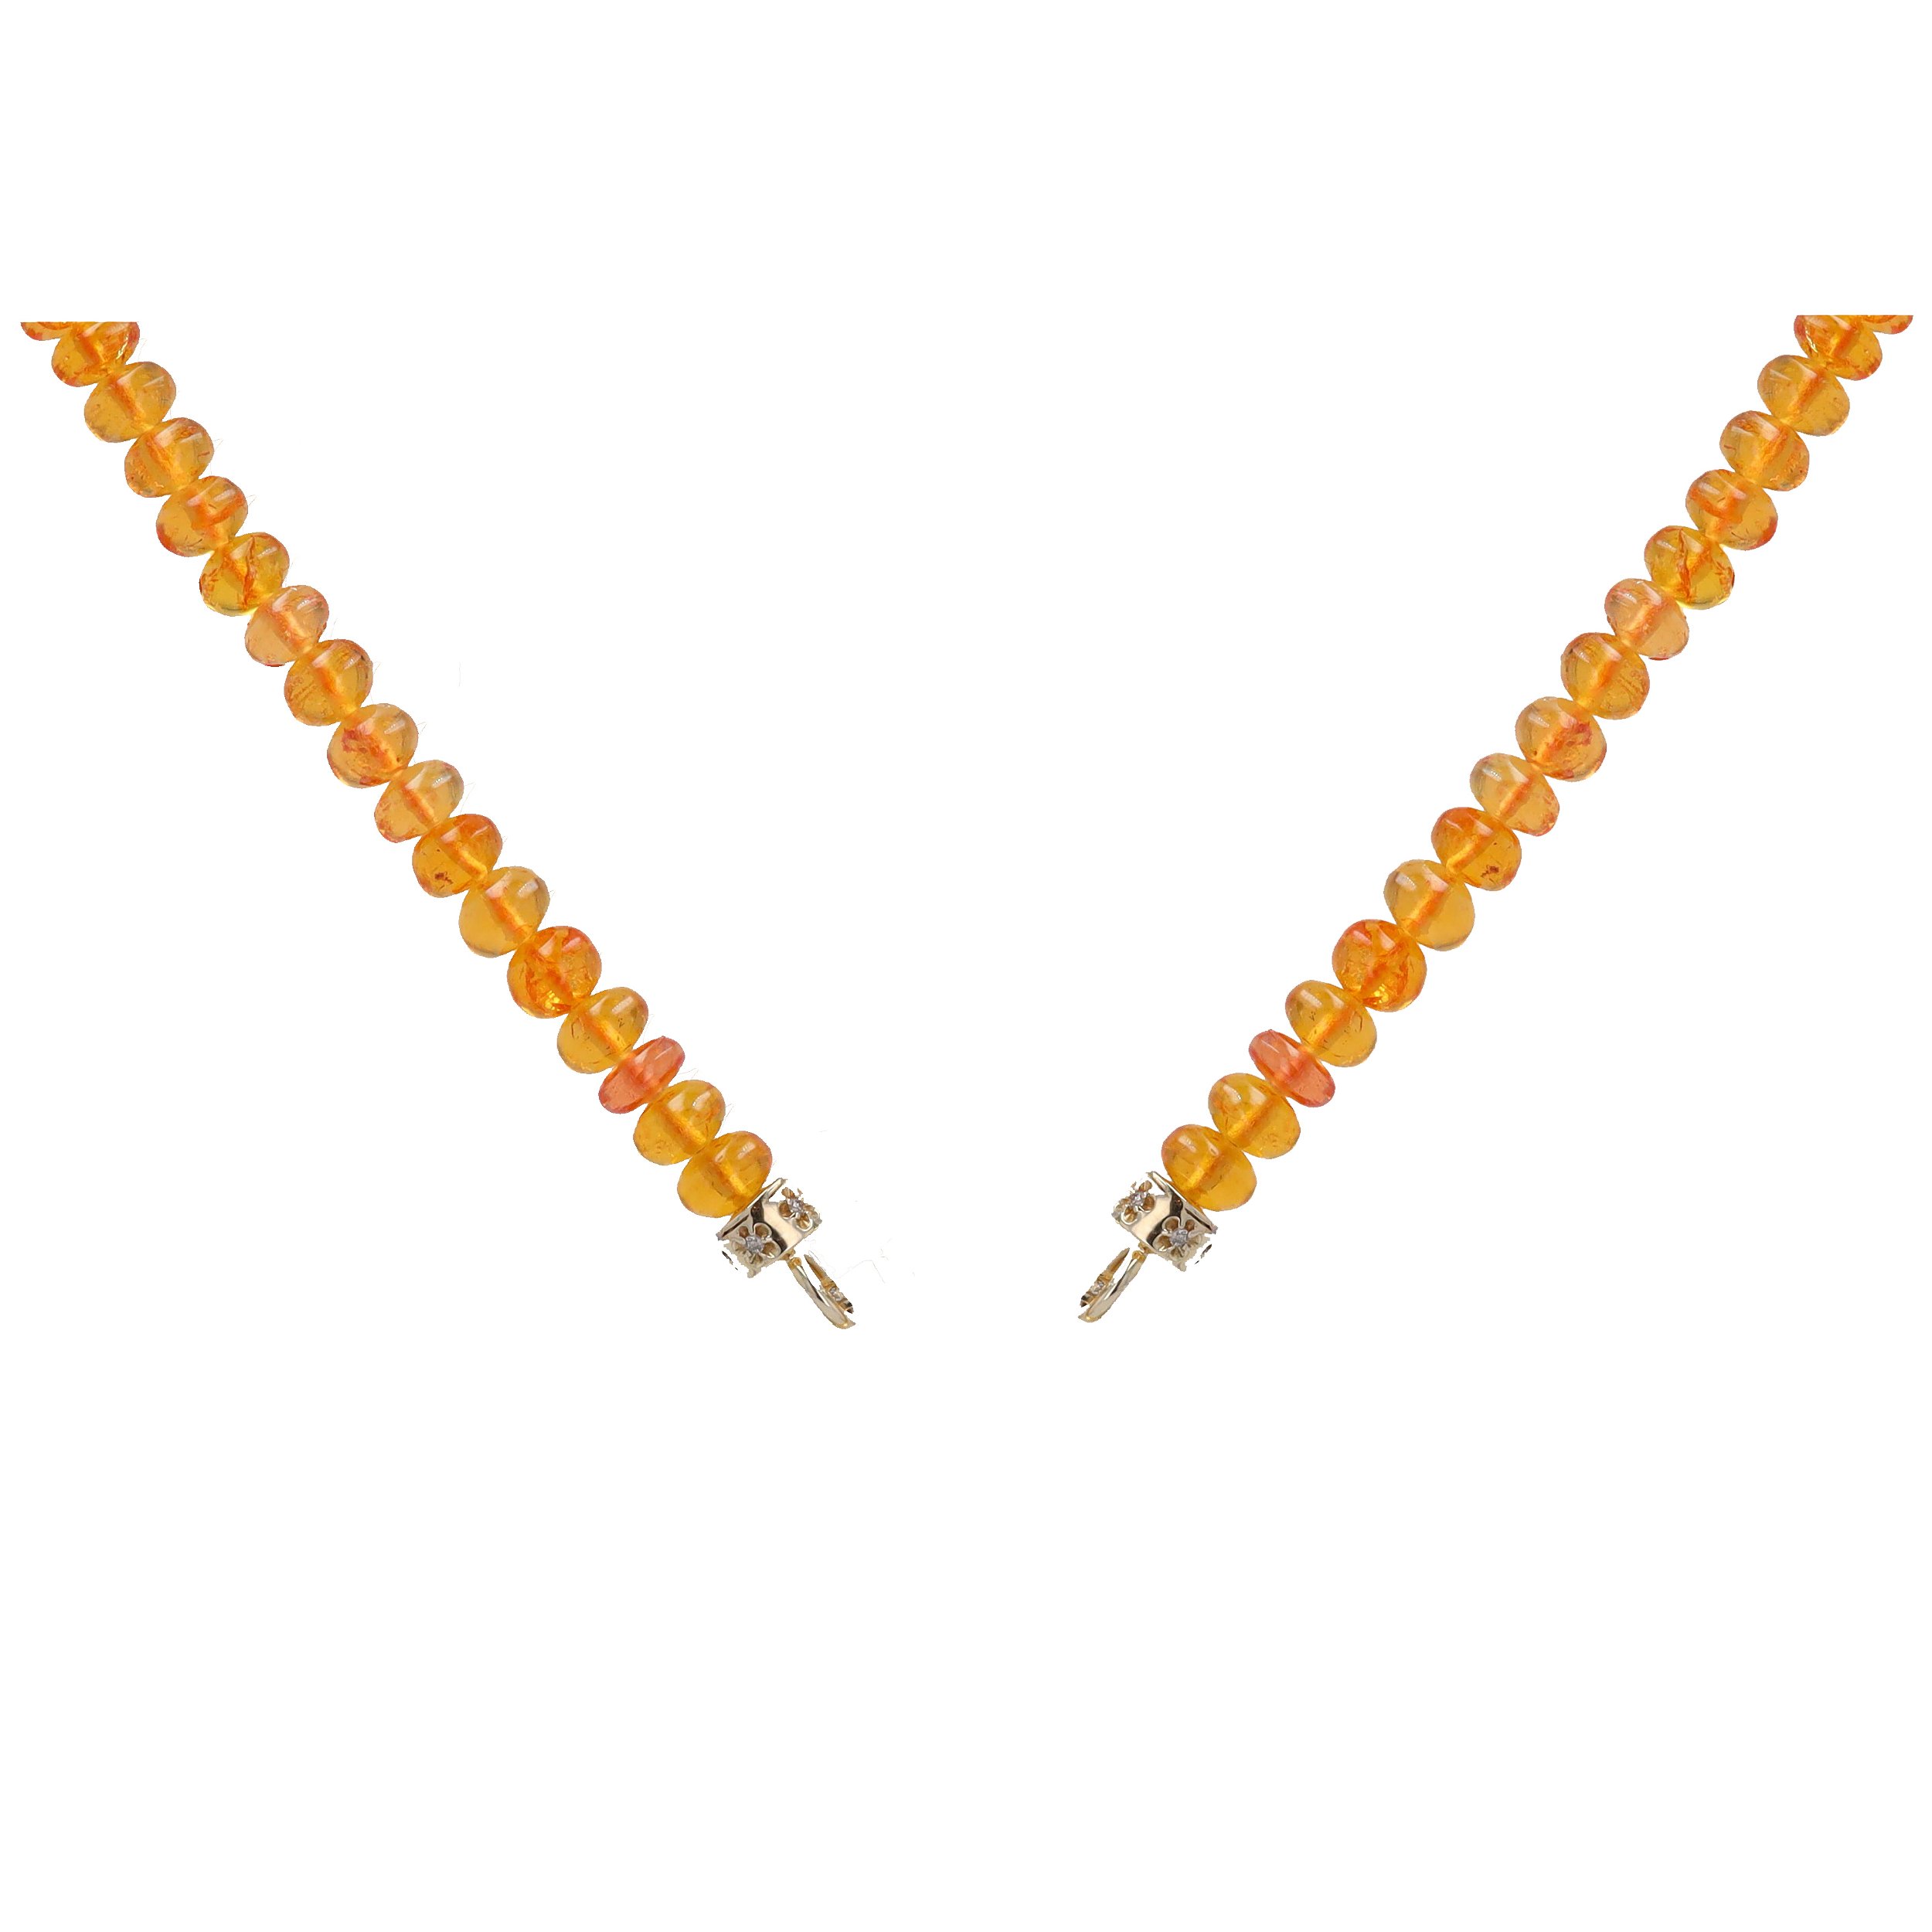 18"-20" 5mm Translucent Hand Polished Orange Garnet Beaded Chain With 14k Gold Extension And End Caps with Diamonds